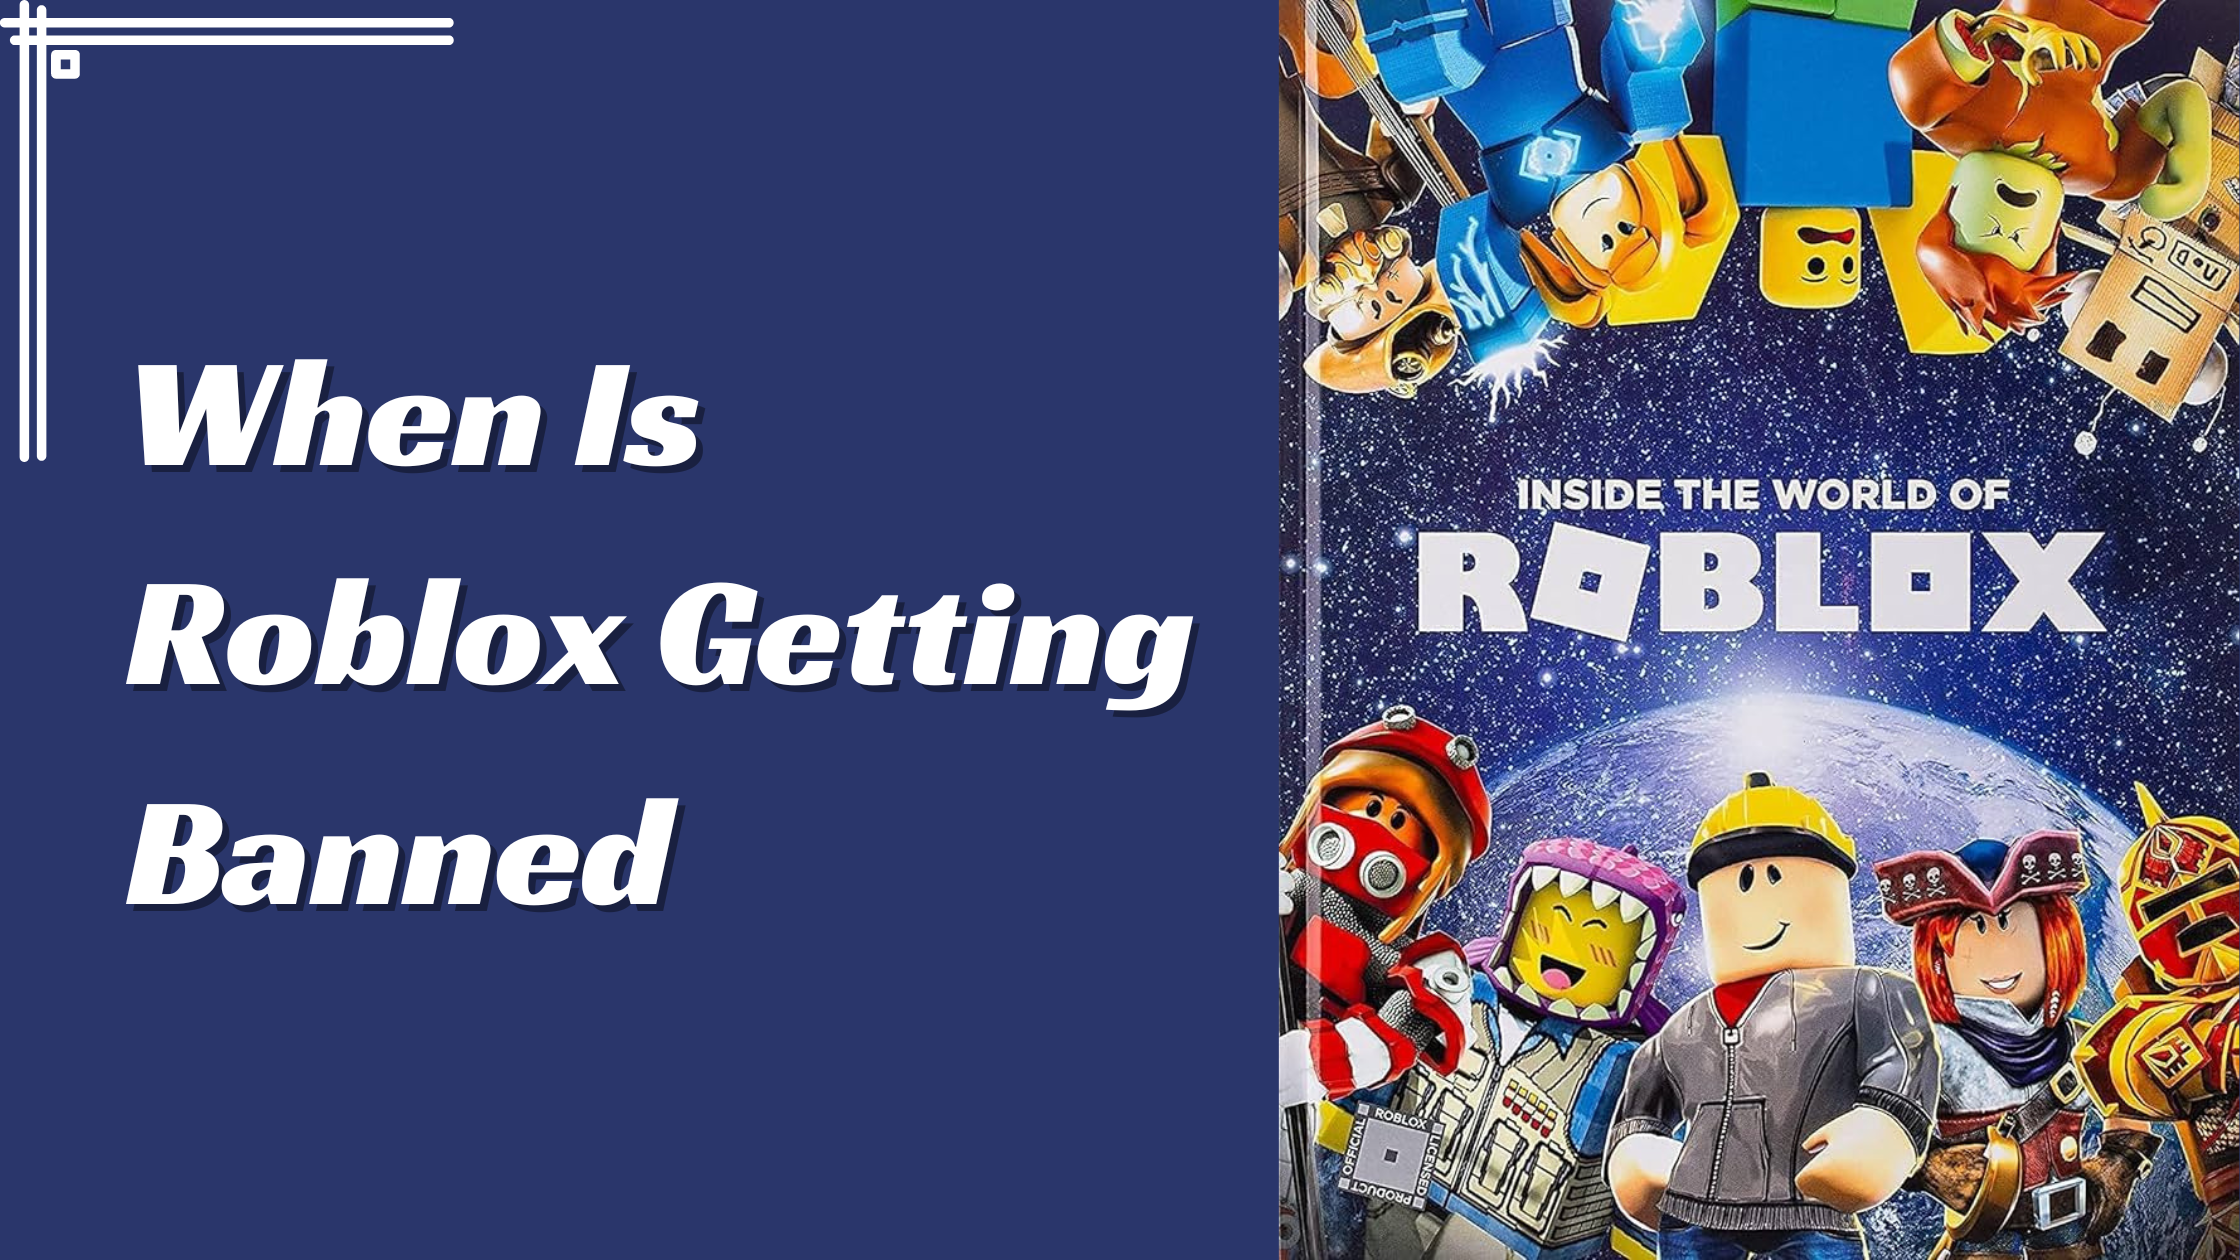 The Future of Roblox: When Is Roblox Getting Banned?